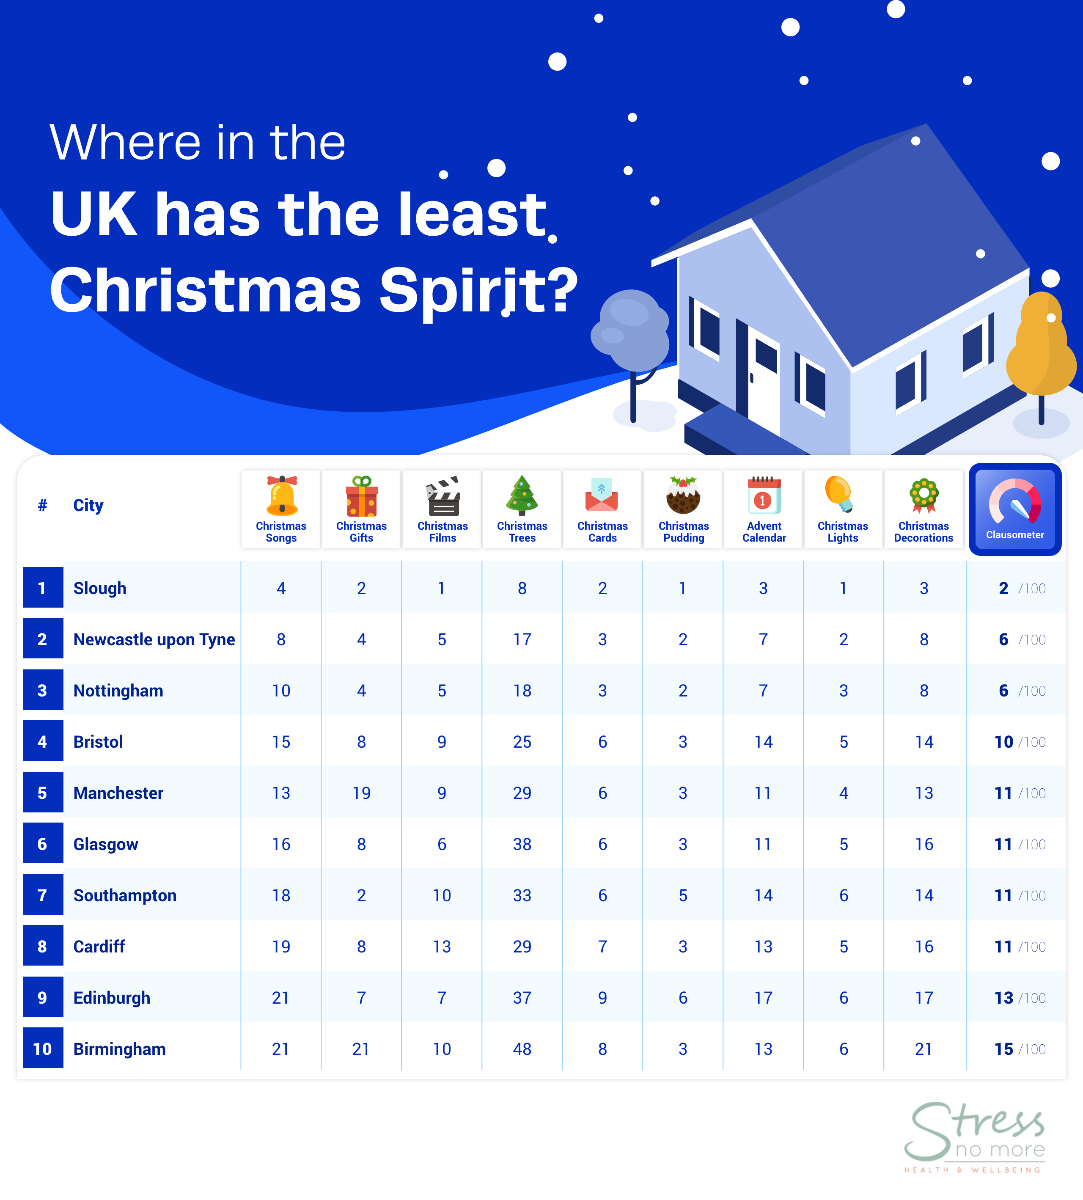 Where in the UK has the least Christmas spirit?